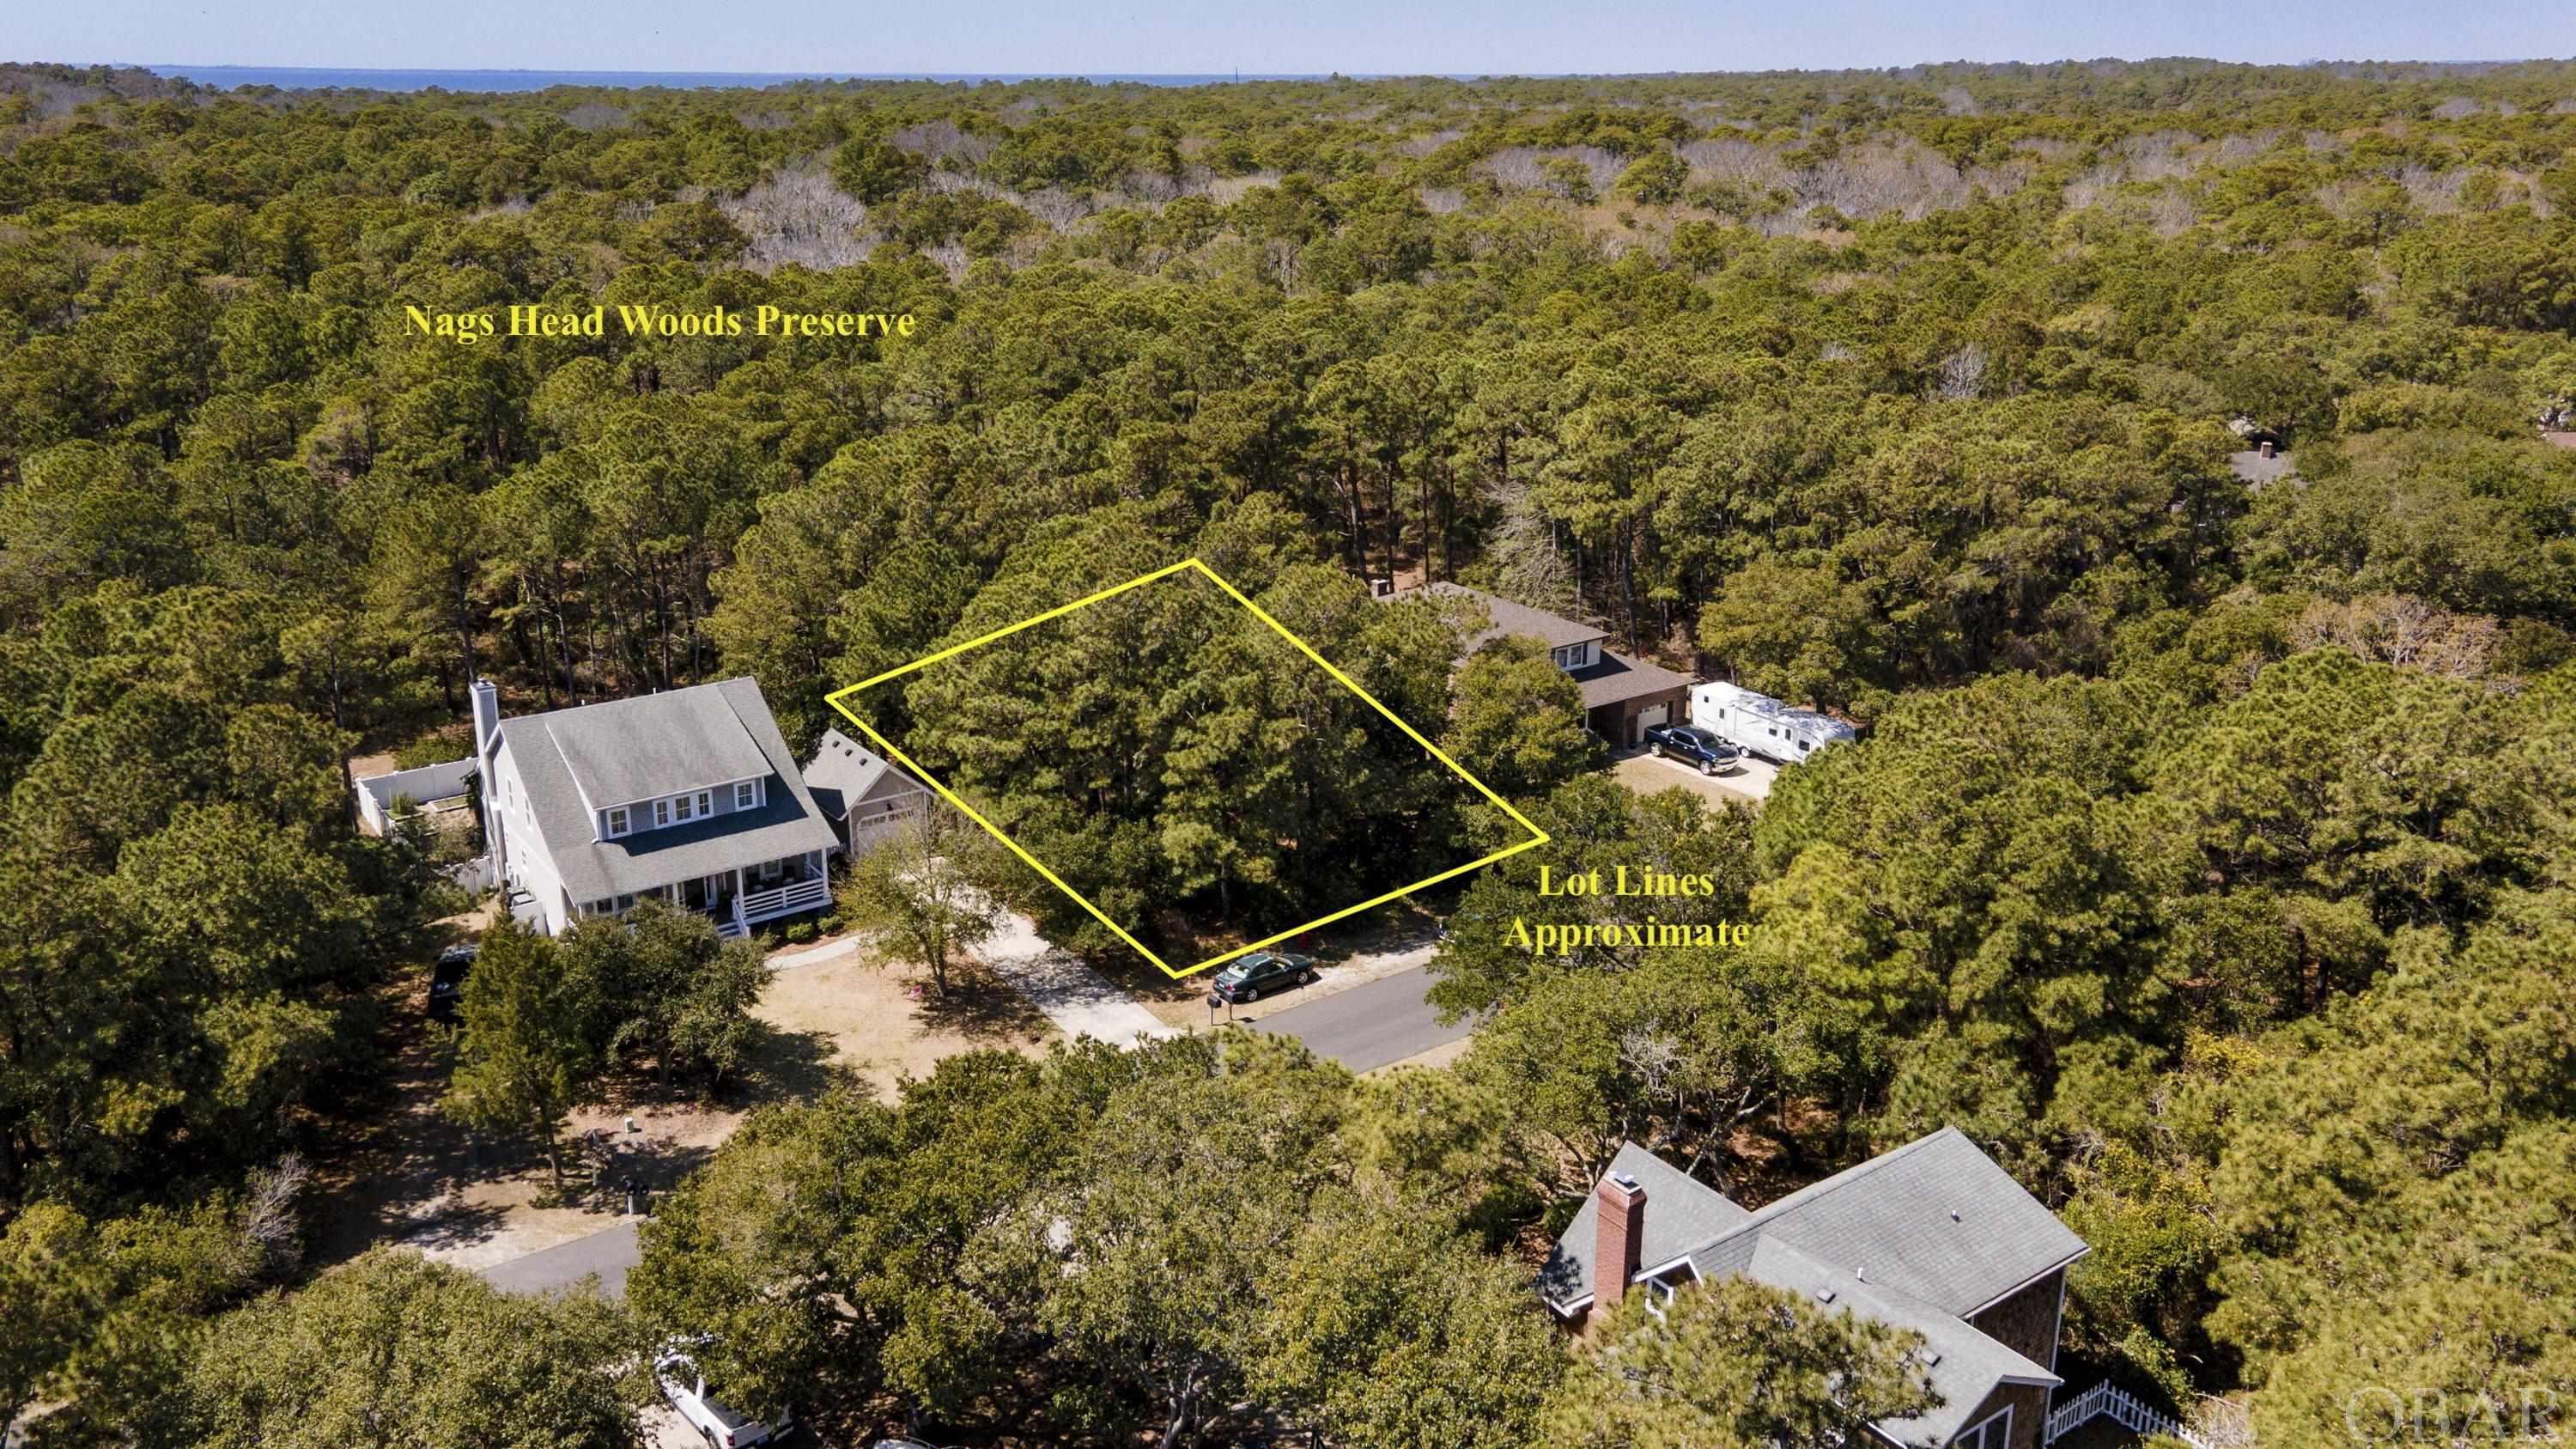 The perfect place to build your dream home on the Outer Banks. Don’t miss this rare opportunity to own one of the few lots in the desirable Nags Head Acres neighborhood that backs up to the Nags Head Woods Preserve. Offering a combination of the peaceful undeveloped nature preserve in your back yard and being centrally located in Nags Head with a grocery store, beach access, multiple restaurants, shops, and so much more all less than 1 mile away.